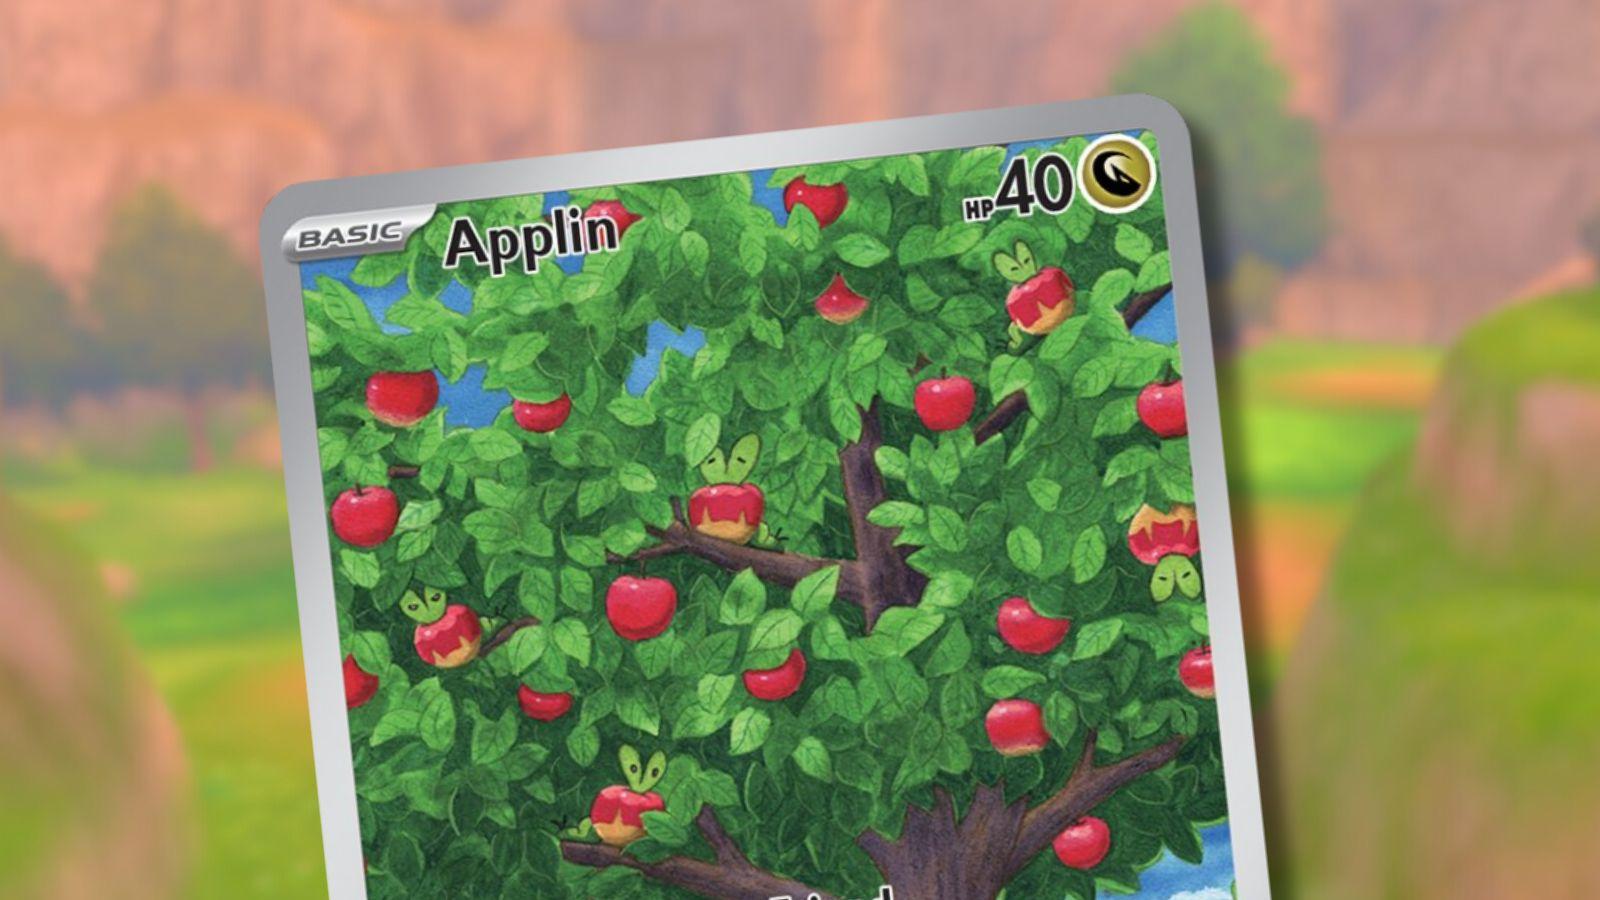 Applin Pokemon card with game background.